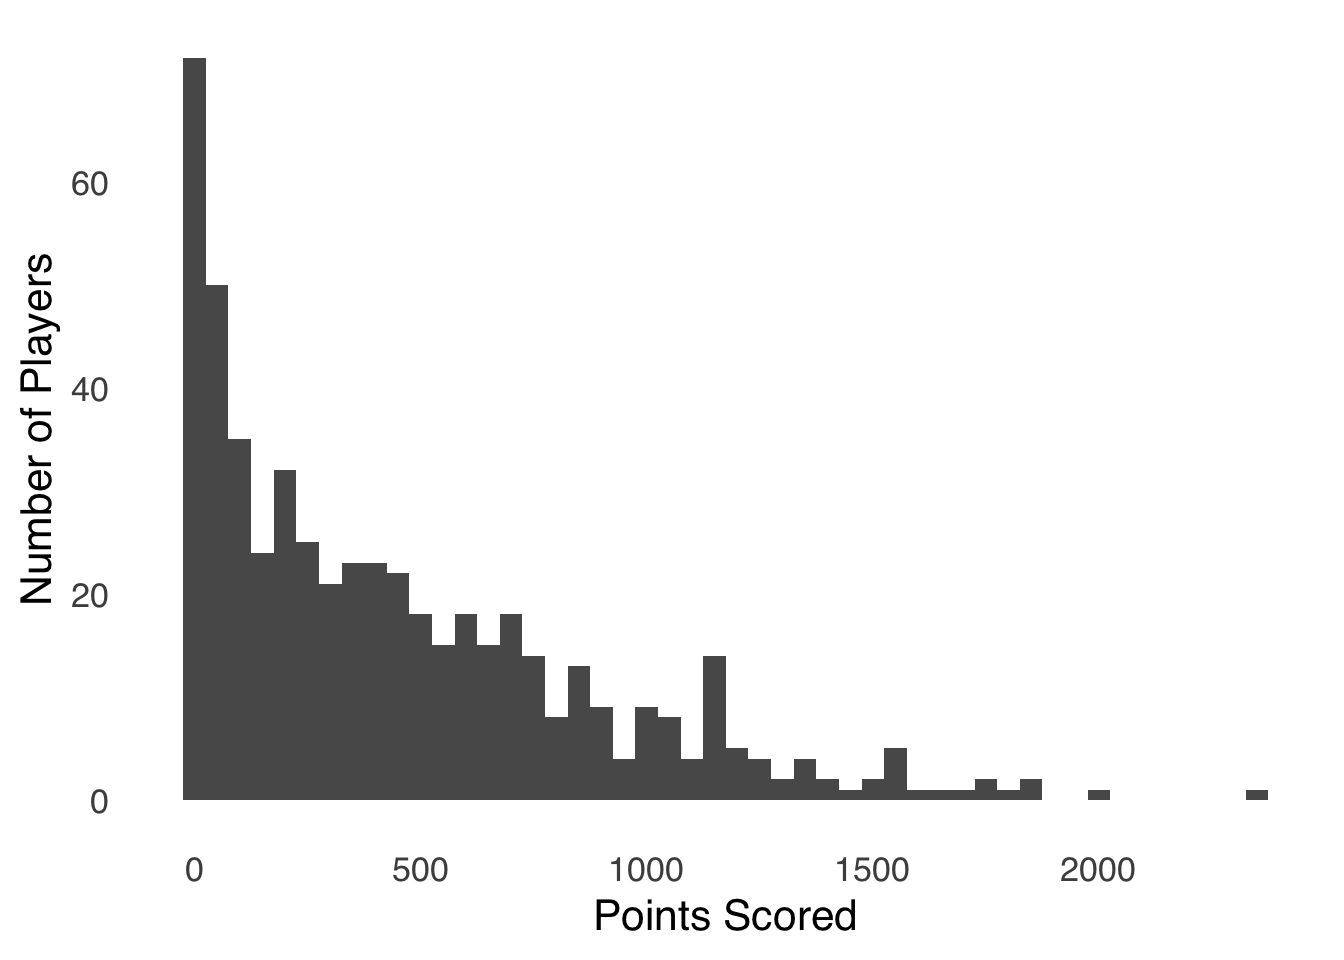 Histogram of Points Scored by Players in the 2019-2020 NBA Season